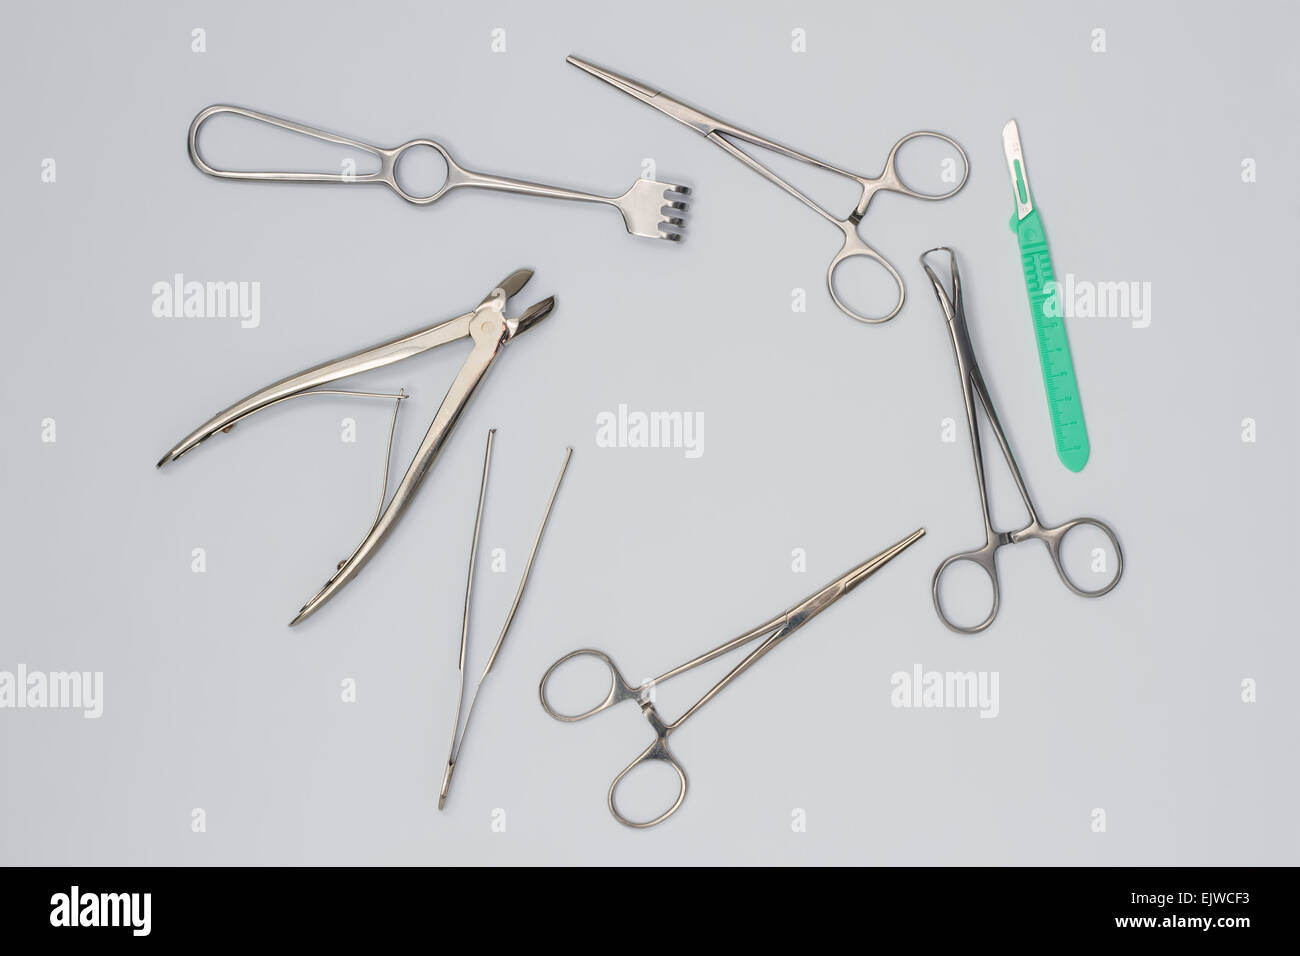 Surgical instruments. Stock Photo